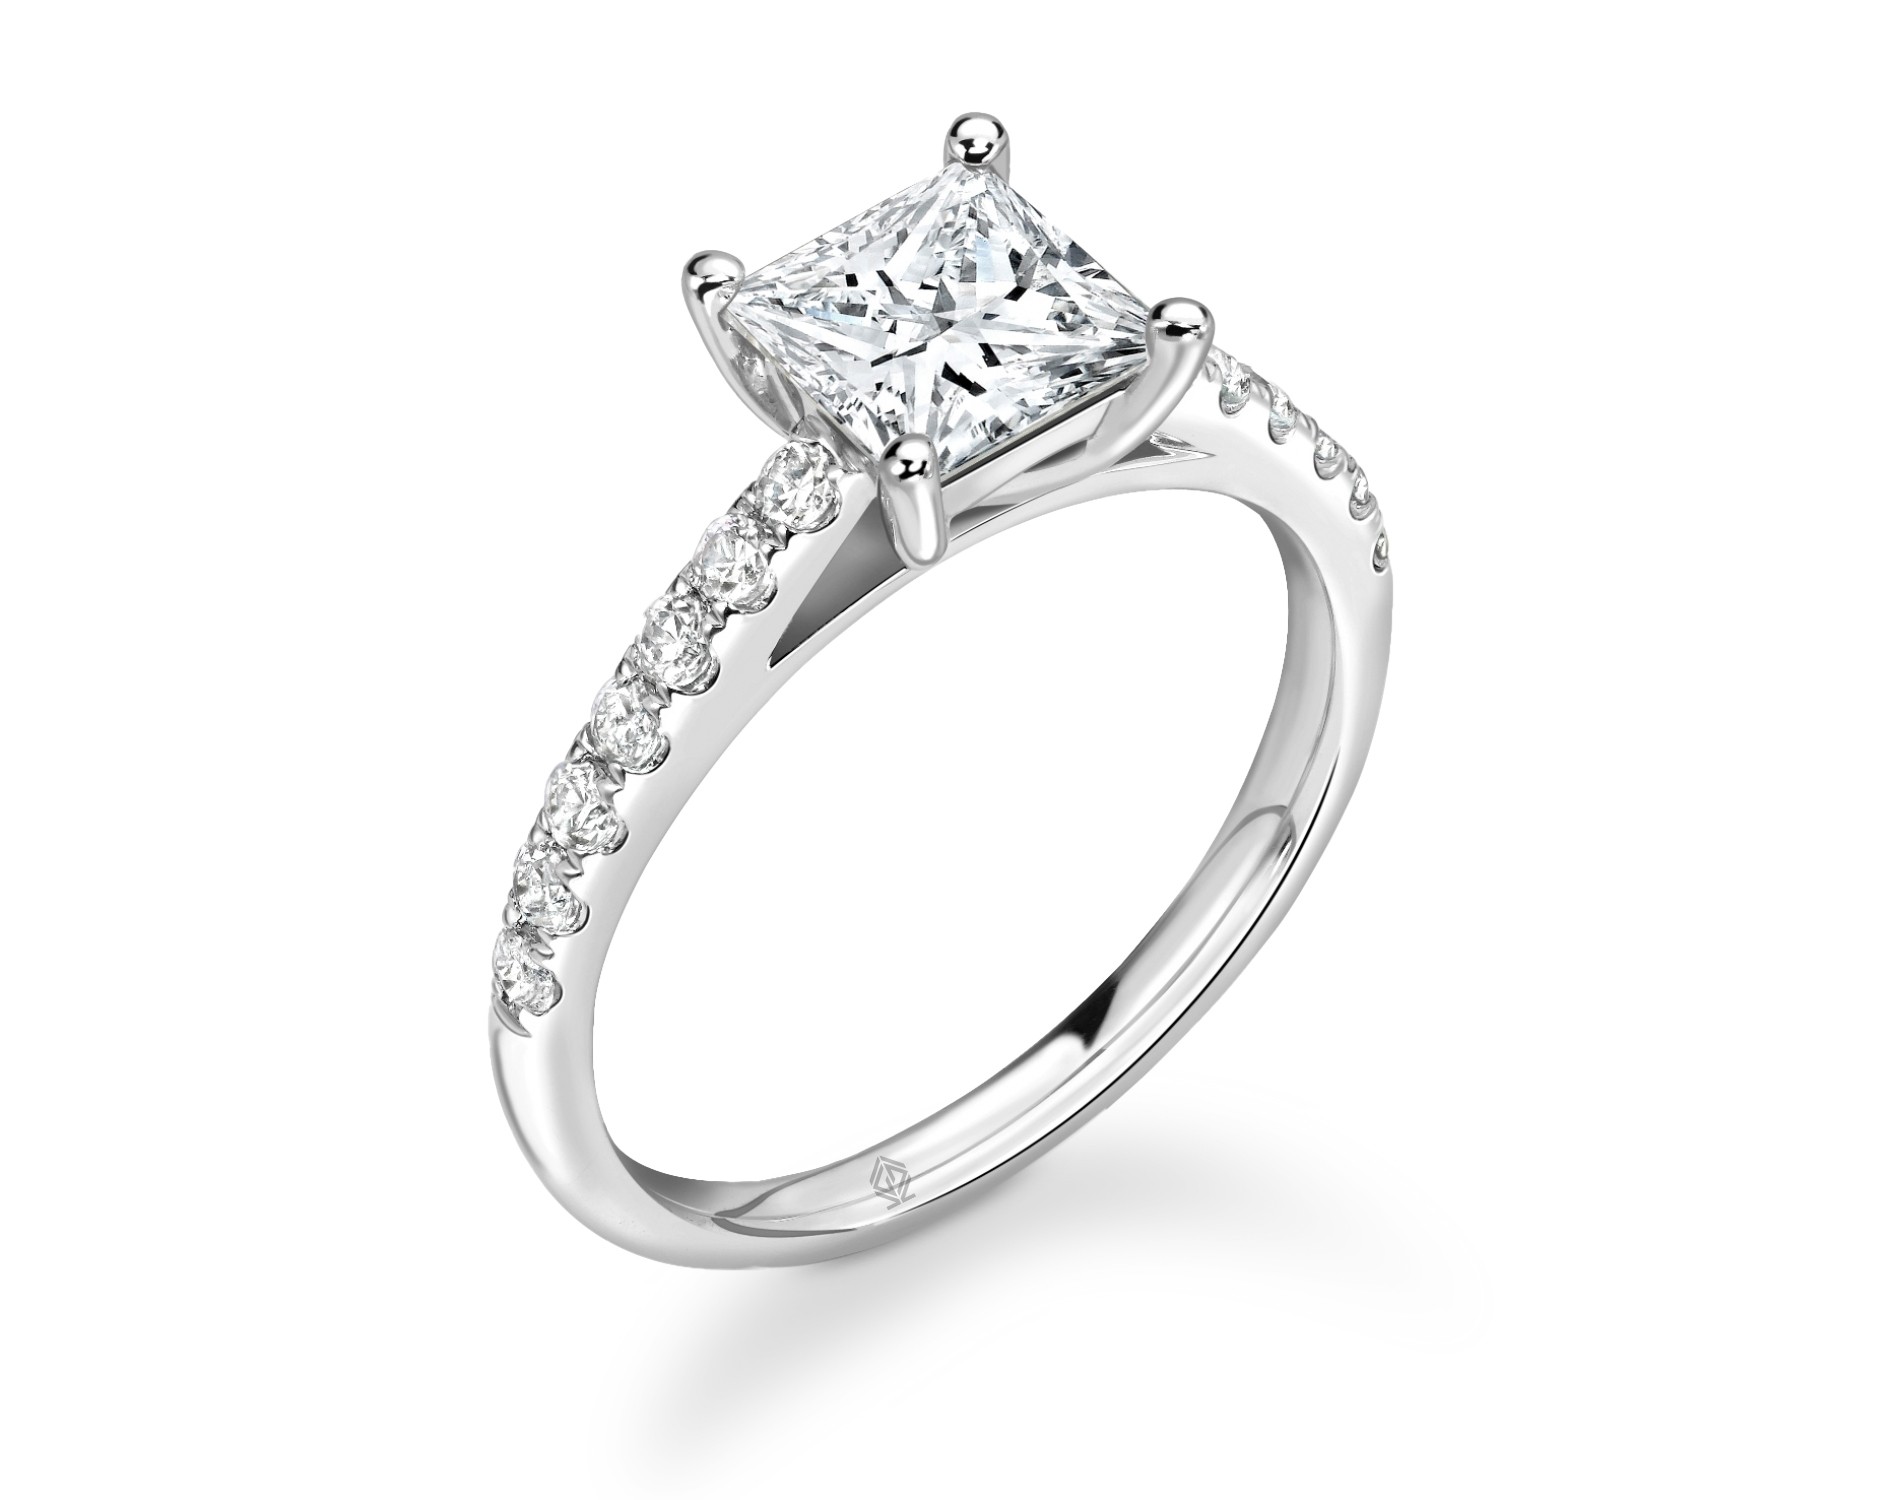 18K WHITE GOLD 4 PRONGS PRINCESS CUT DIAMOND ENGAGEMENT RING WITH SIDE STONES PAVE SET